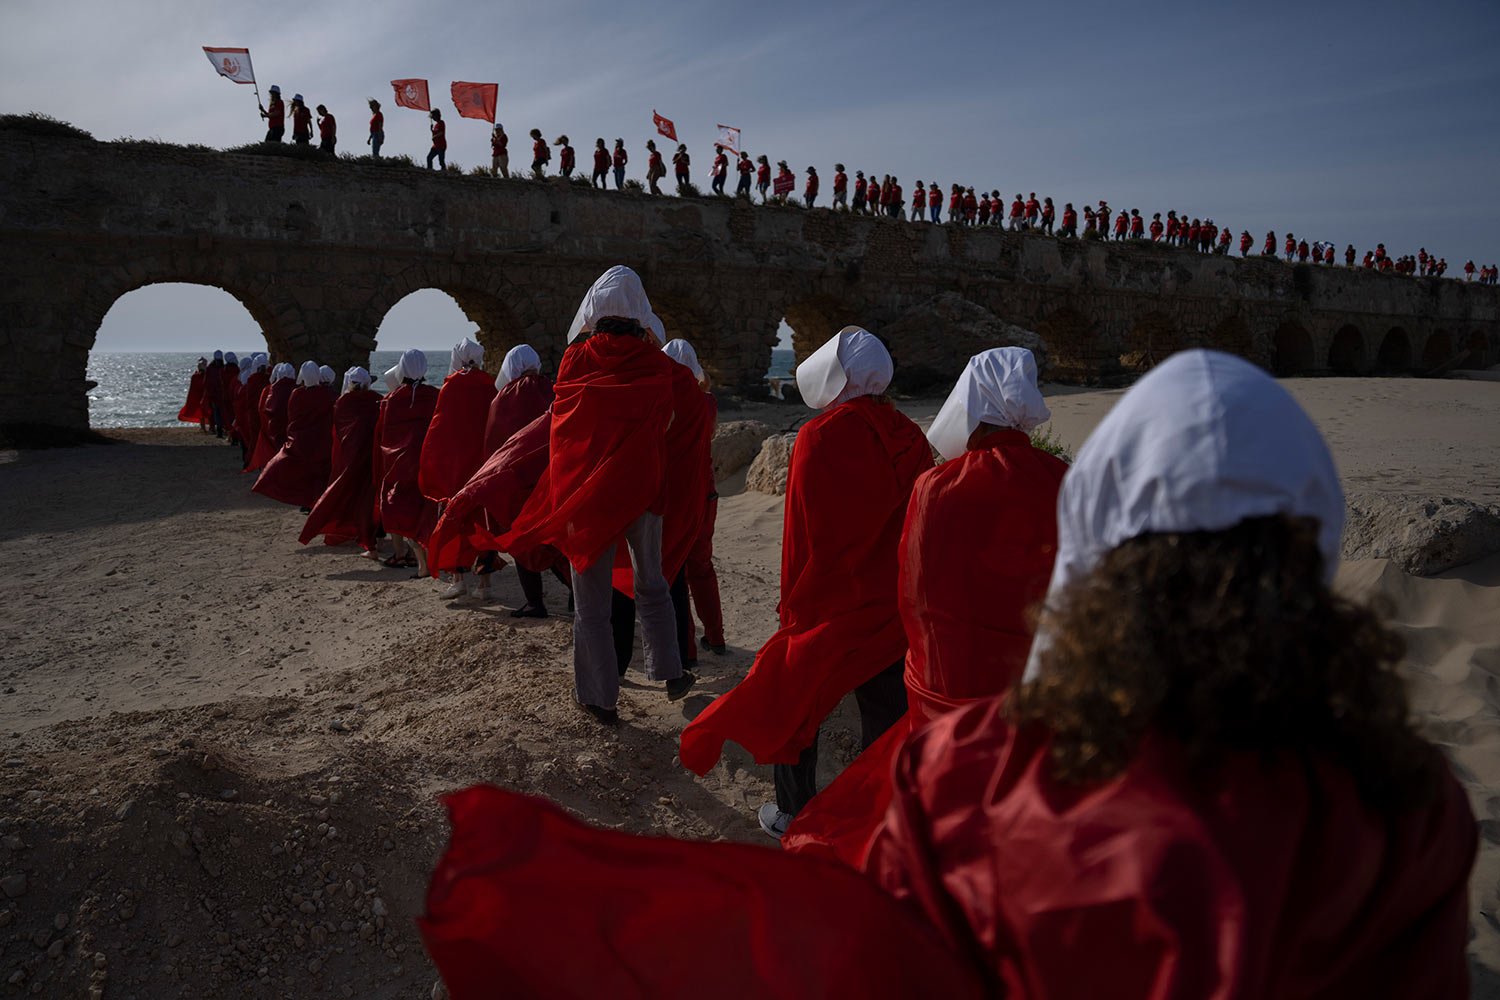  Protesters dressed as characters from The Handmaid's Tale TV series attend a protest against Prime Minister Benjamin Netanyahu's government at the beach in Cesarea, Israel, Tuesday, May 16, 2023. (AP Photo/Oded Balilty) 